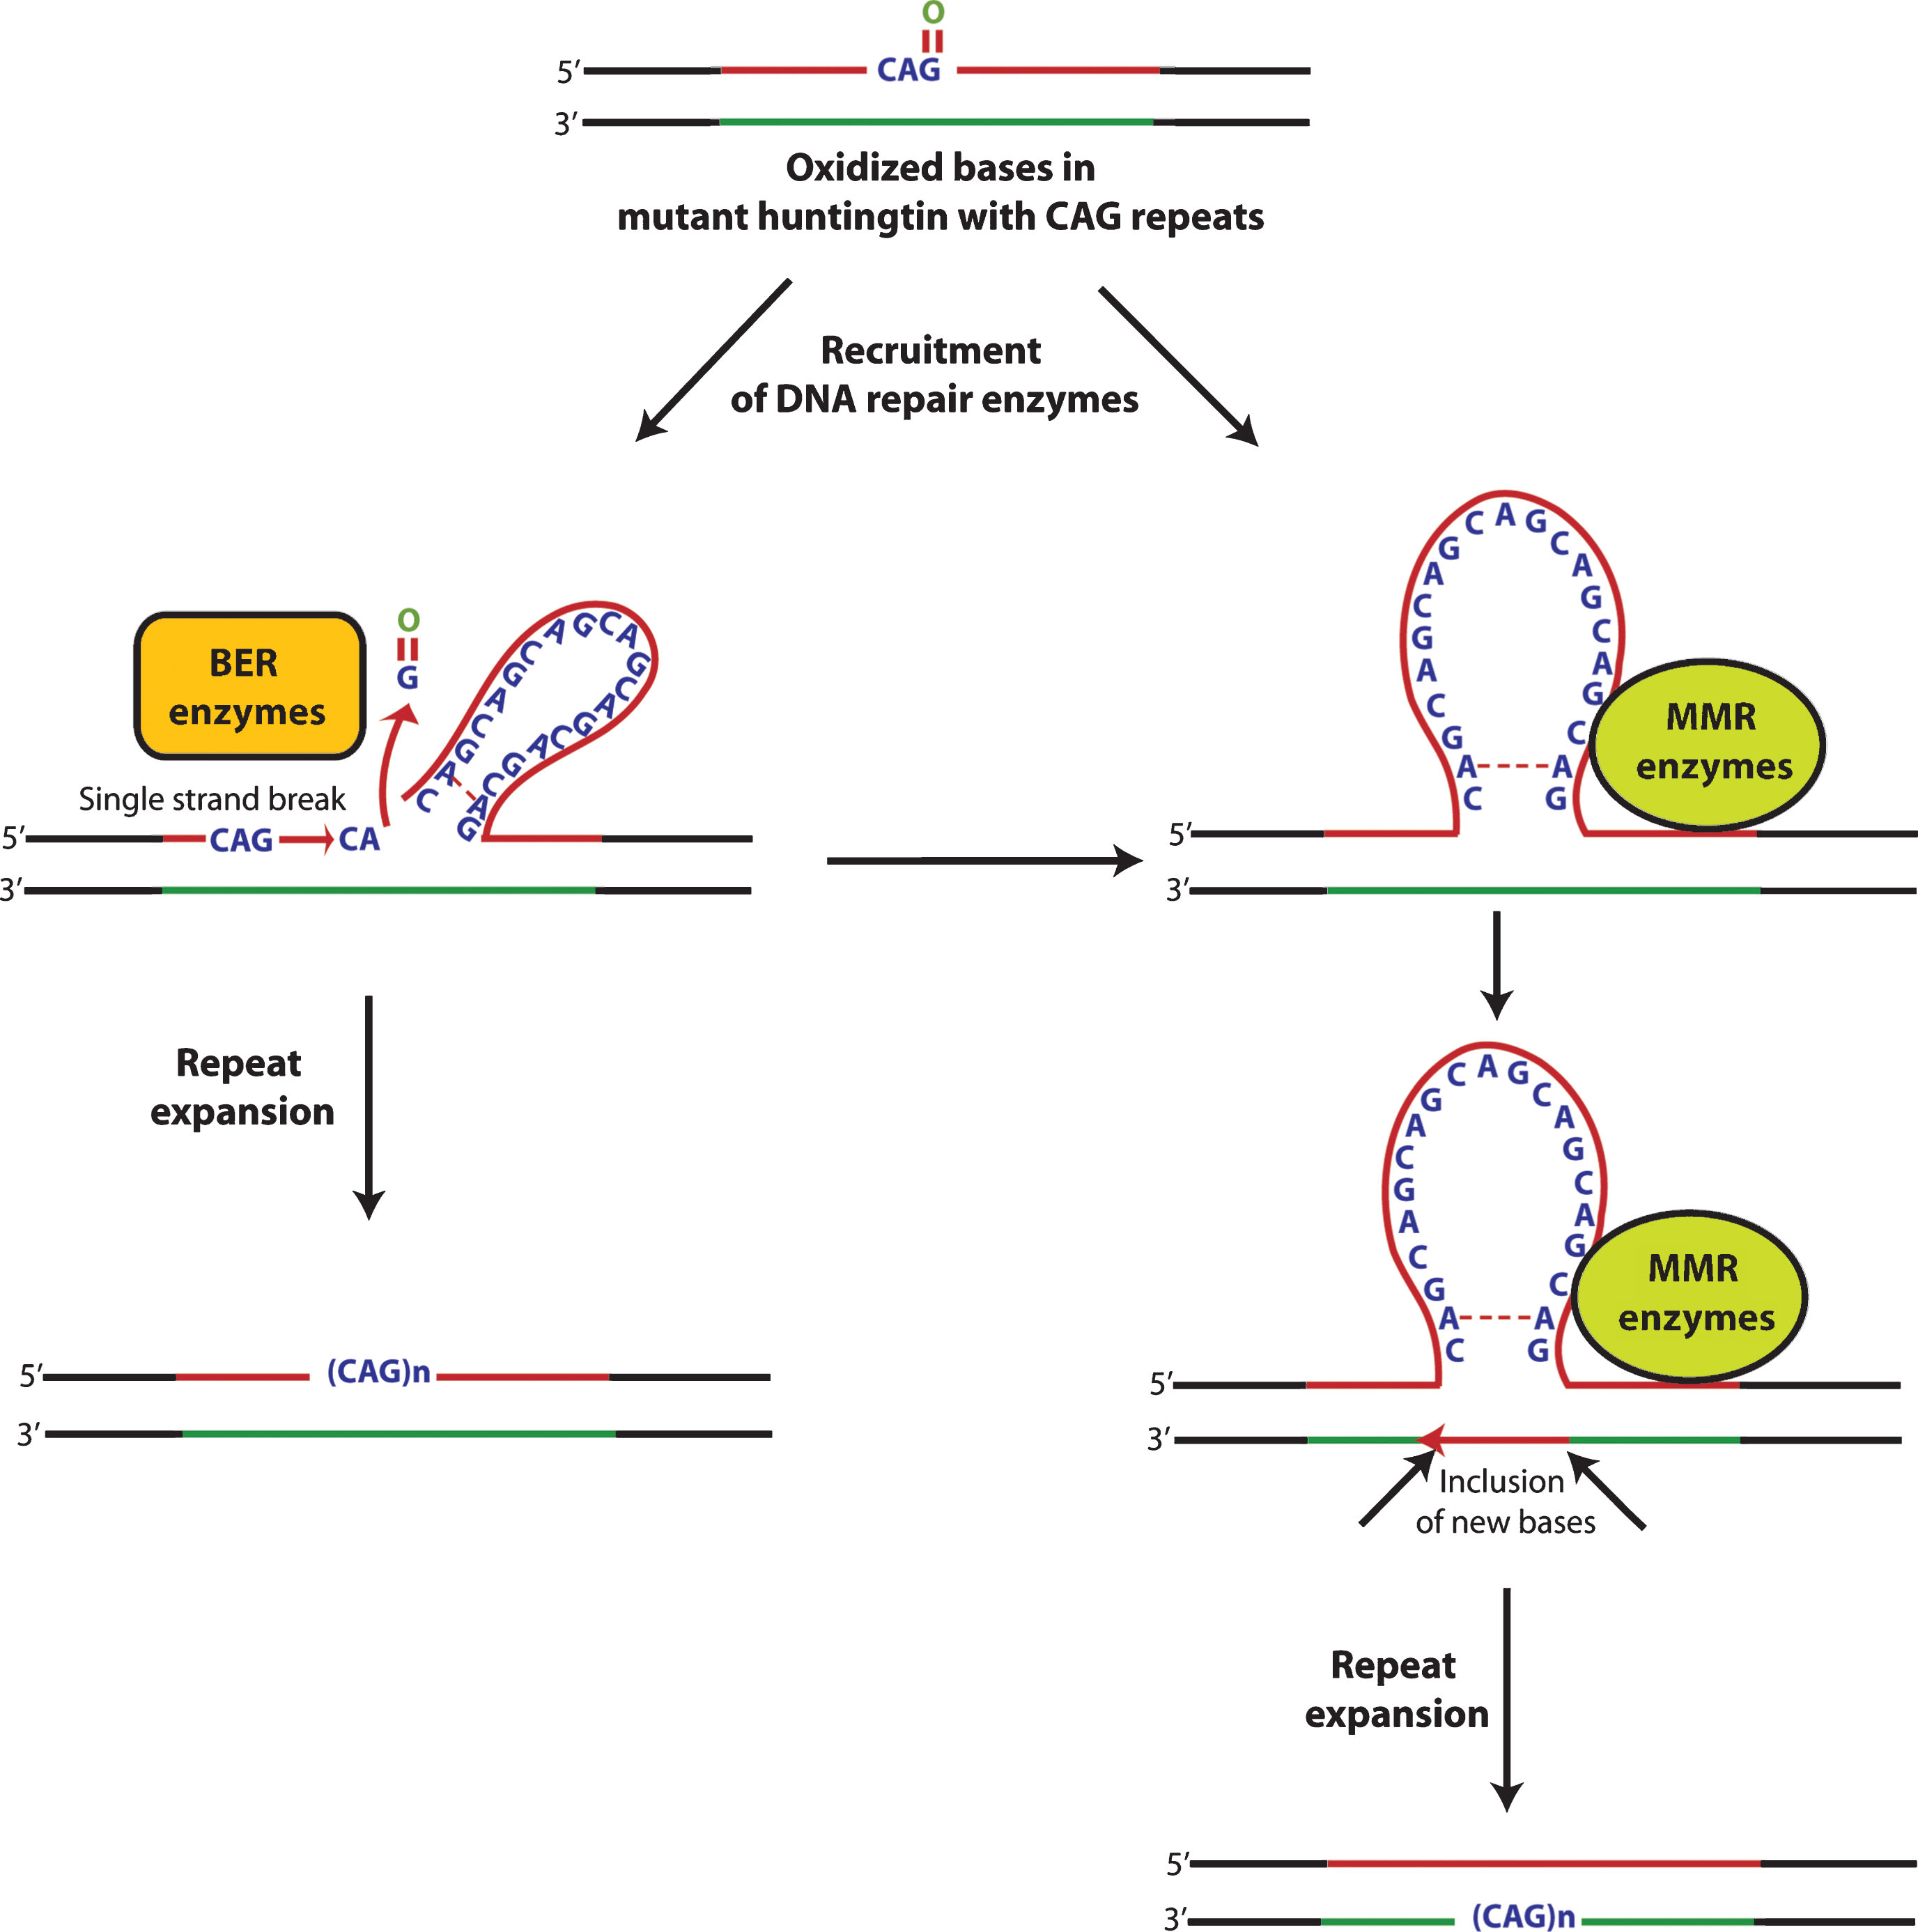 A coupled chain of oxidation-repair cycle leads to expansion and instability of huntingtin polyglutamine repeats. DNA oxidation induces an adaptive response in the form of recruitment of DNA repair enzymes. These enzymes are recruited in response to either hairpin loop structure or other secondary structures formed either because of oxidized bases and/or base mismatches leading to strand slippage and instability. Moreover, a complex cyclic interplay between oxidized bases and DNA repair enzymes leads to further expansion of trinucleotide repeats and its instability.